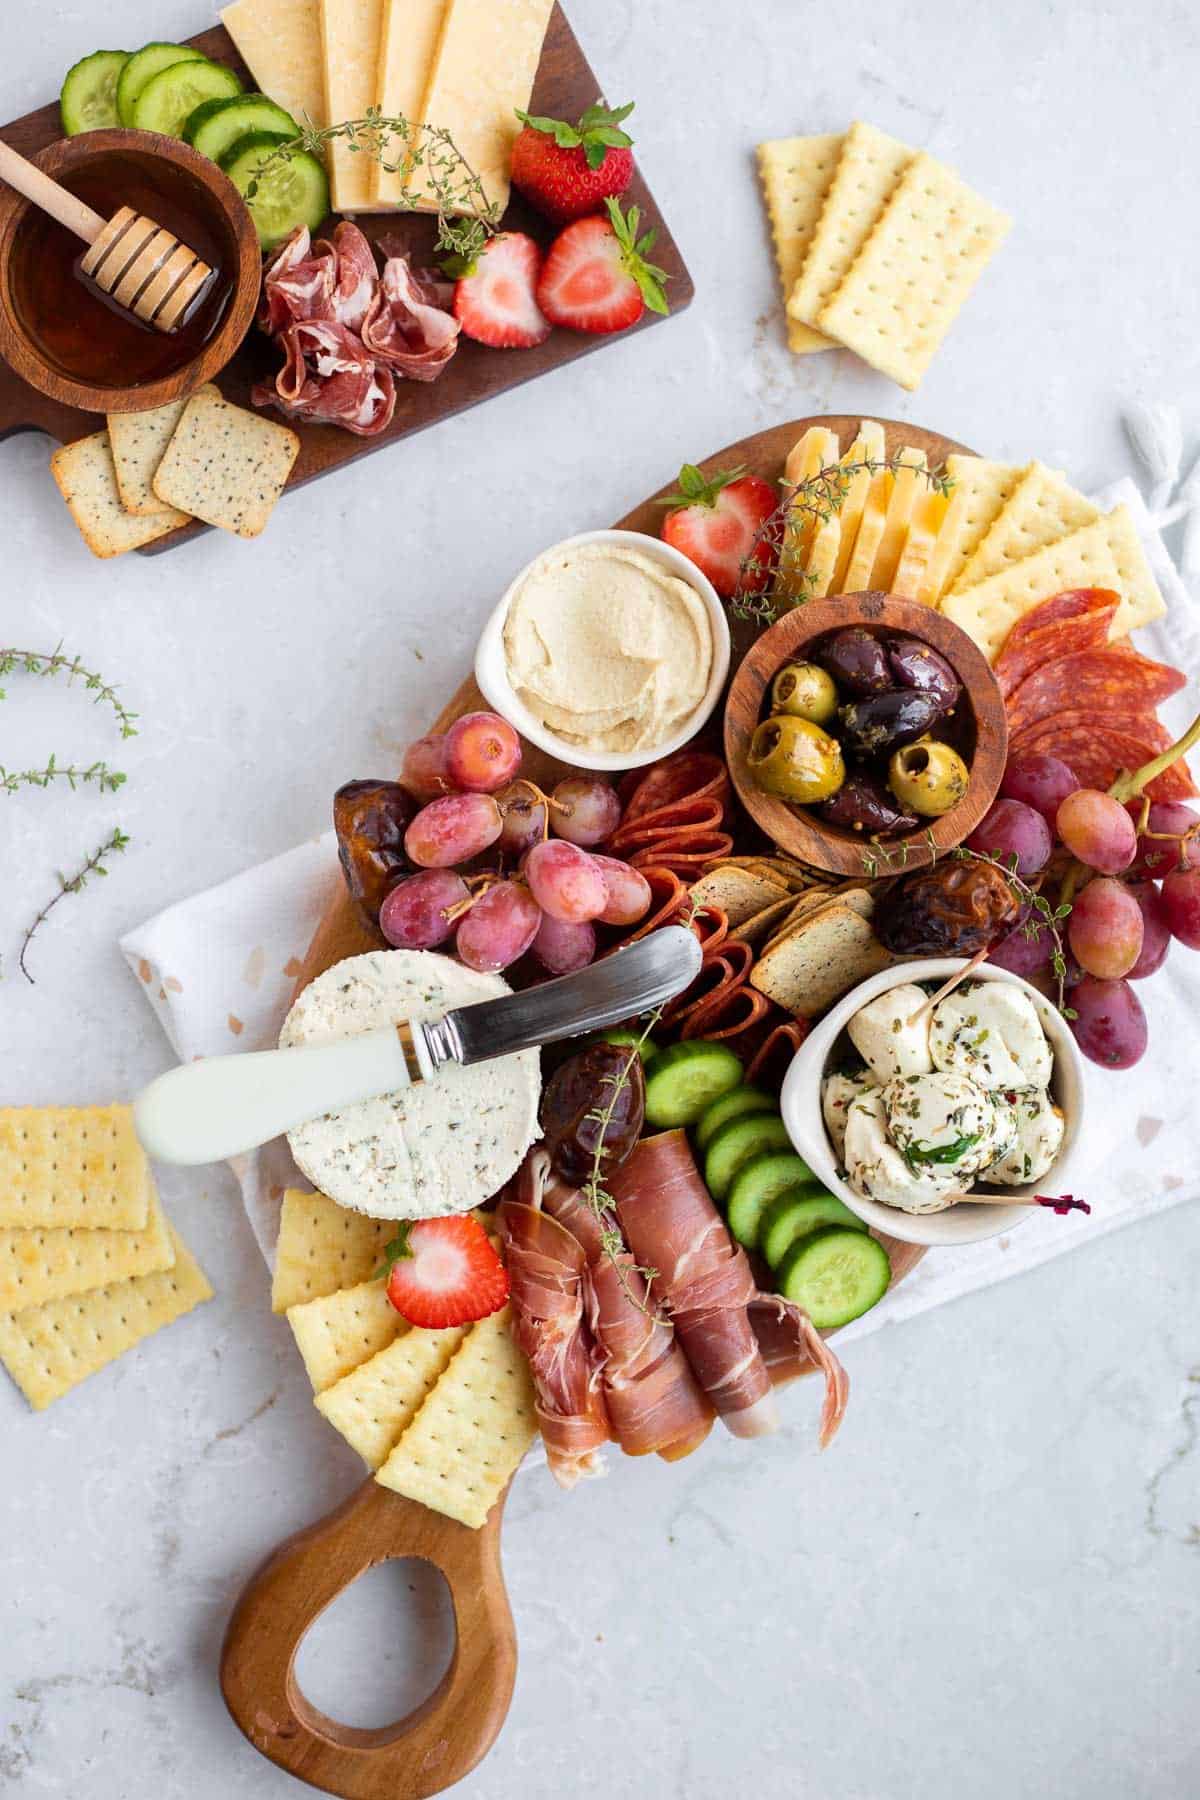 How to Make a Charcuterie Board - What Is a Charcuterie Board?